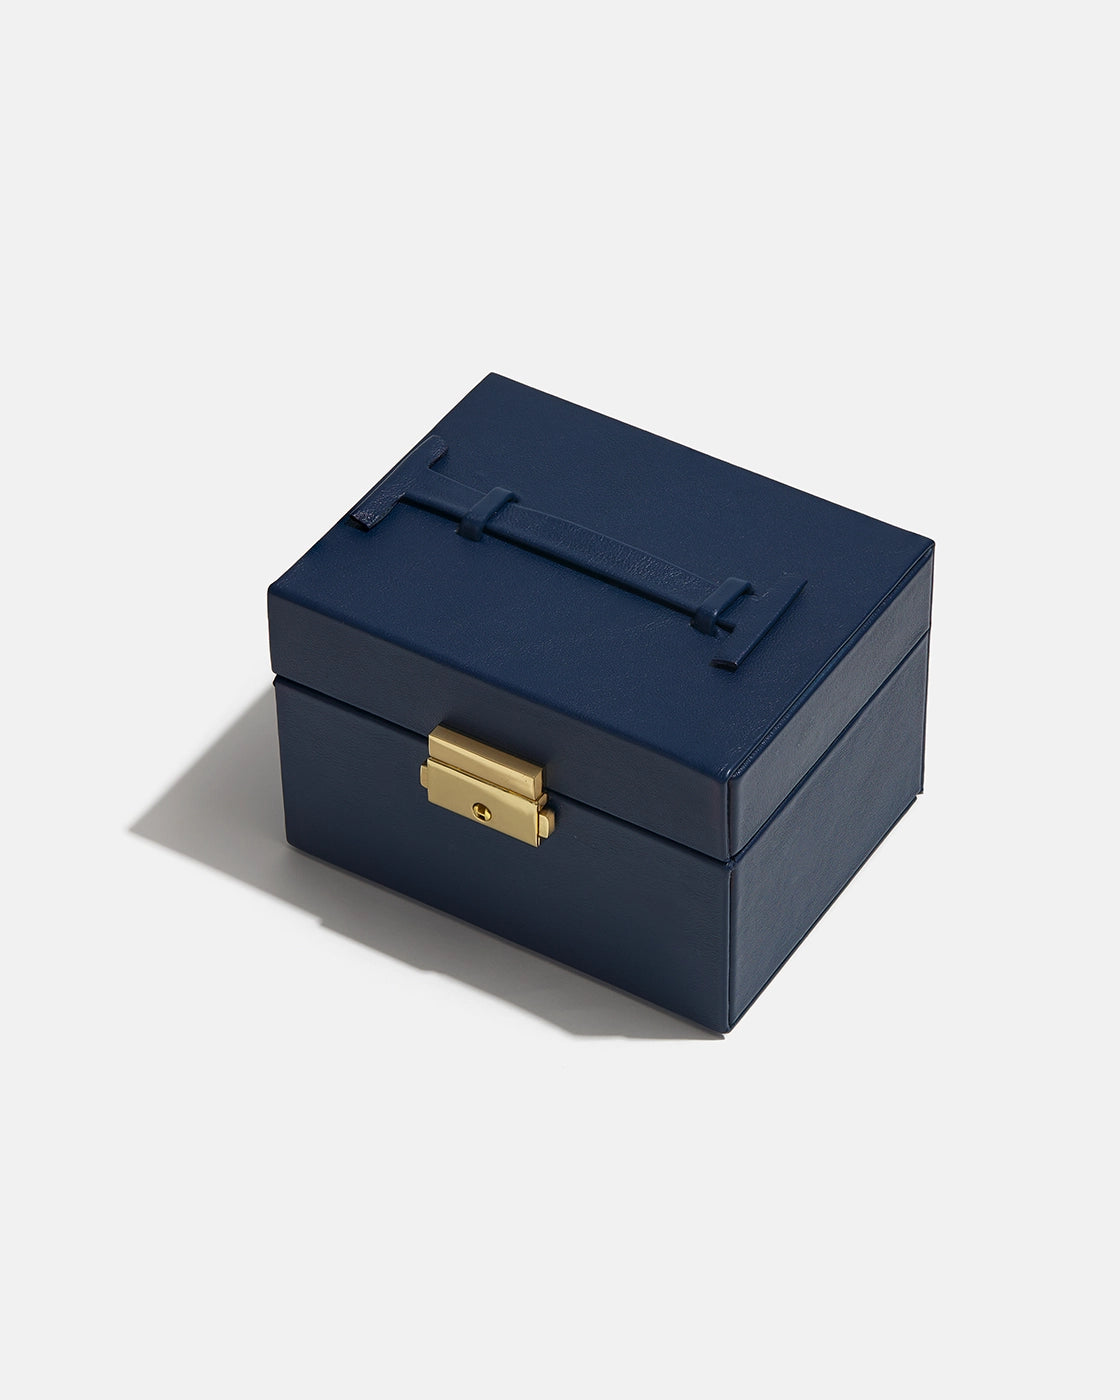 Handmade Leather Jewelry Box in Navy Blue